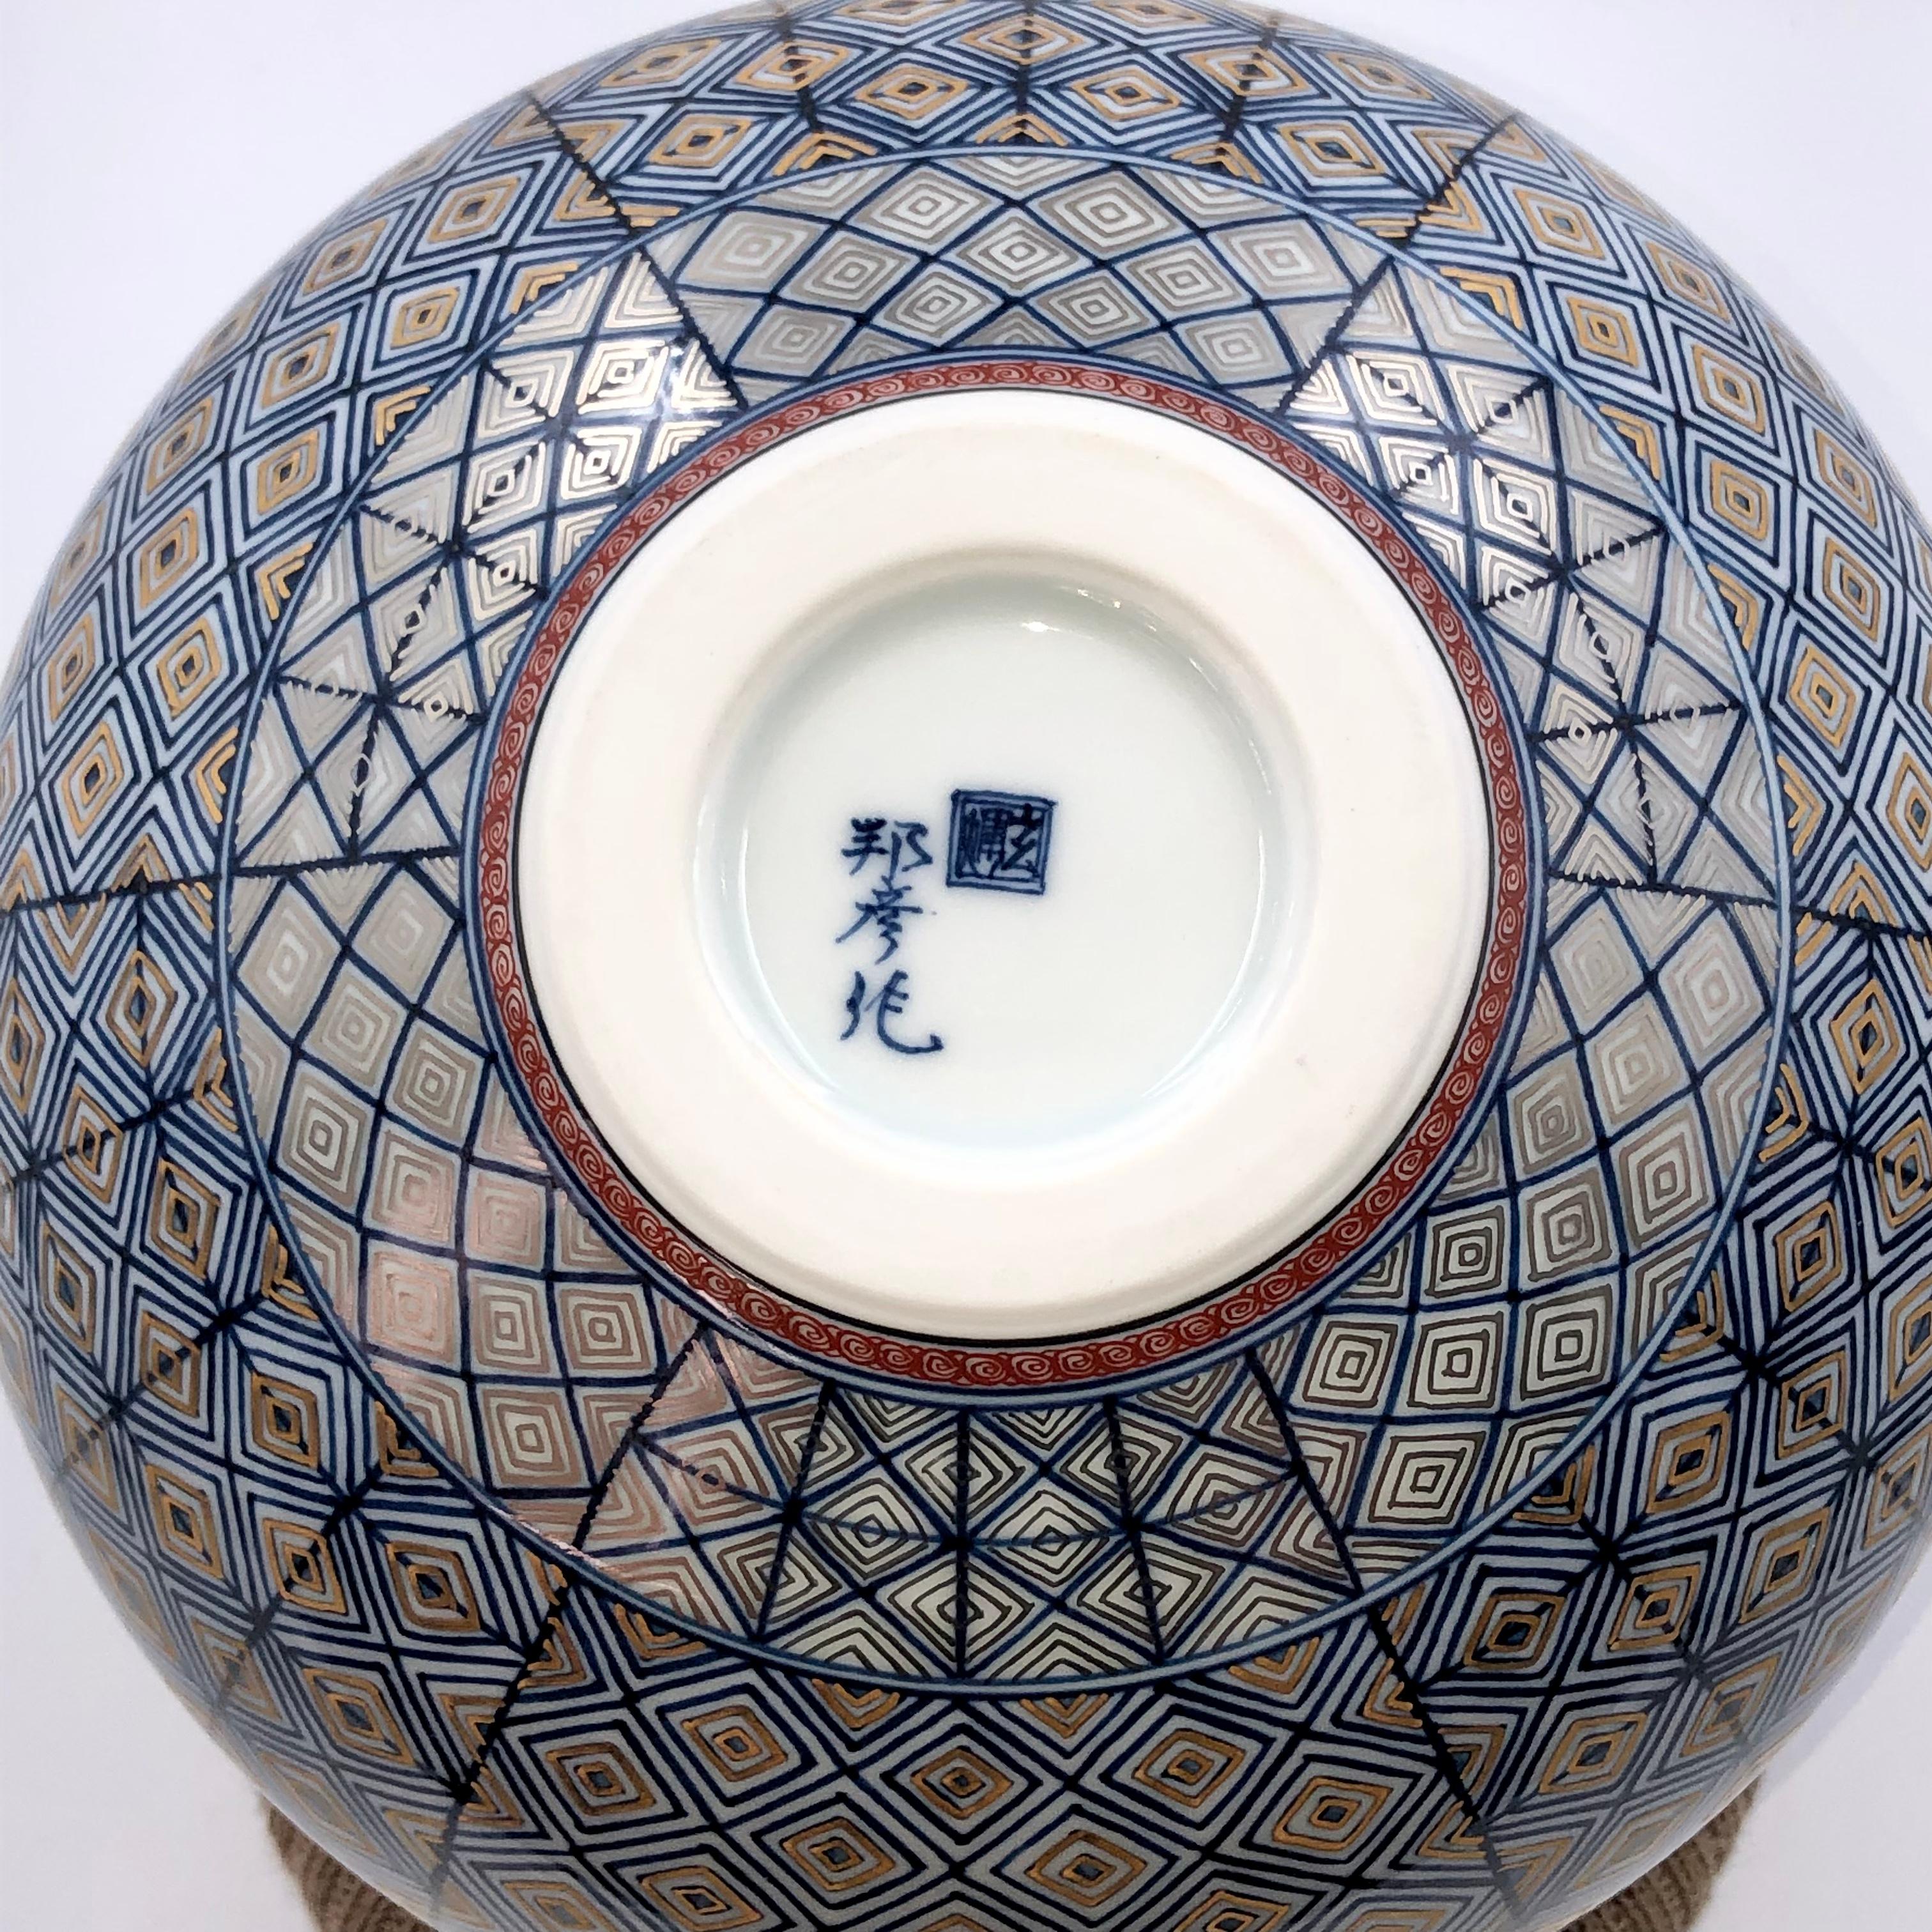 Exquisite Japanese contemporary museum quality decorative porcelain vase in a stunning ovoid shape featuring the artist's signature geometric pattern that is extremely intricately hand painted in stunning deep blue and gold. It is a signed